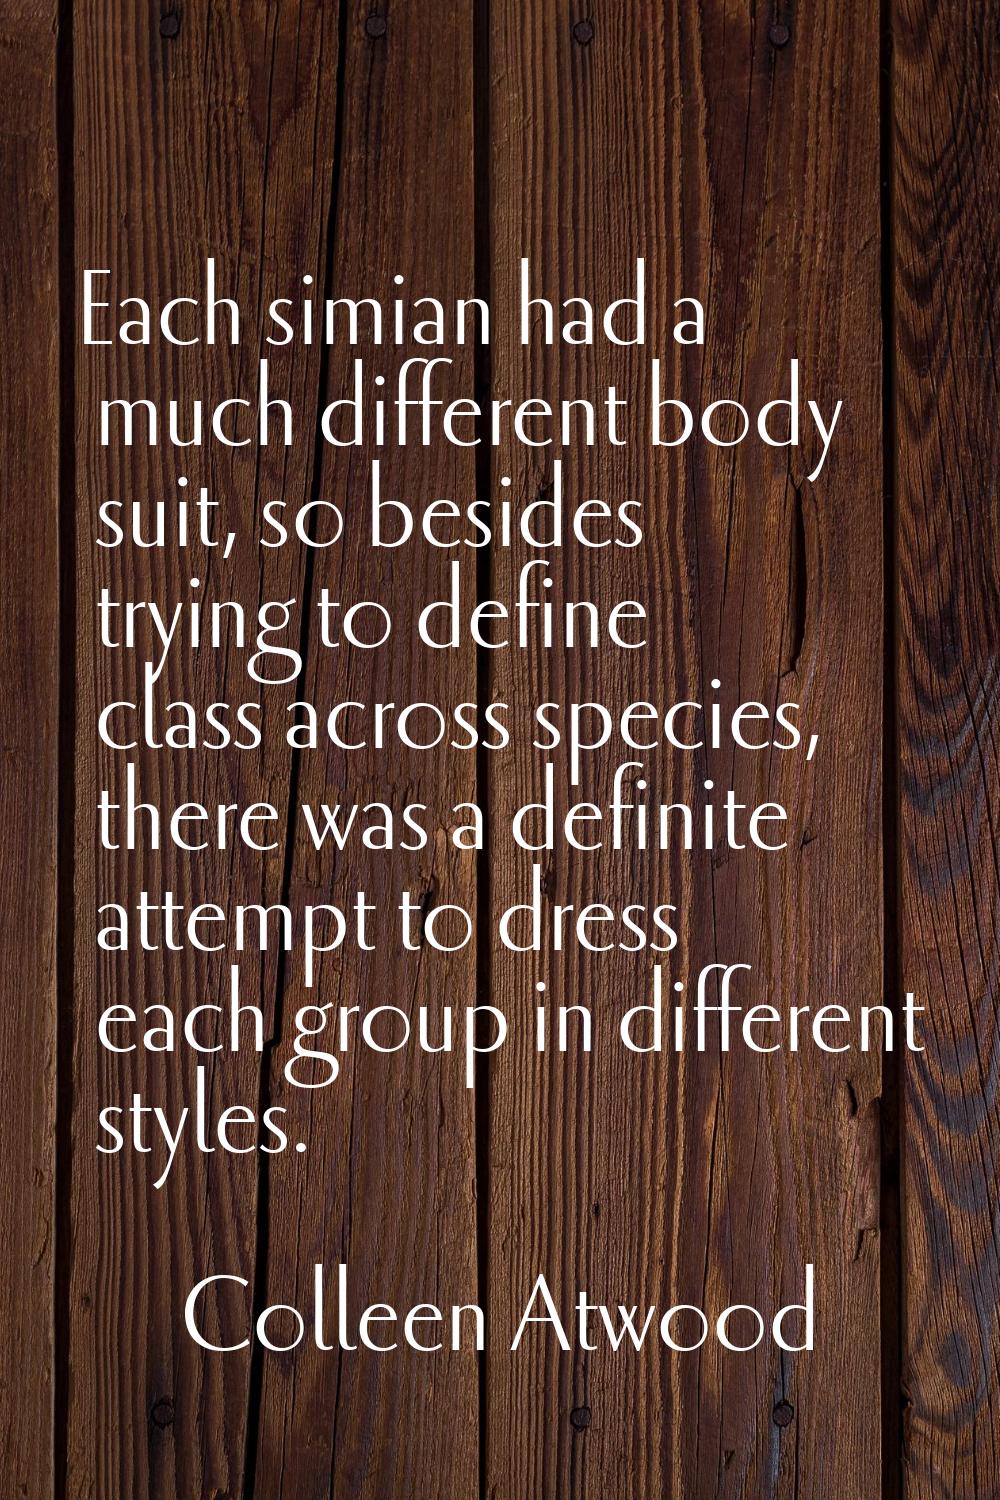 Each simian had a much different body suit, so besides trying to define class across species, there